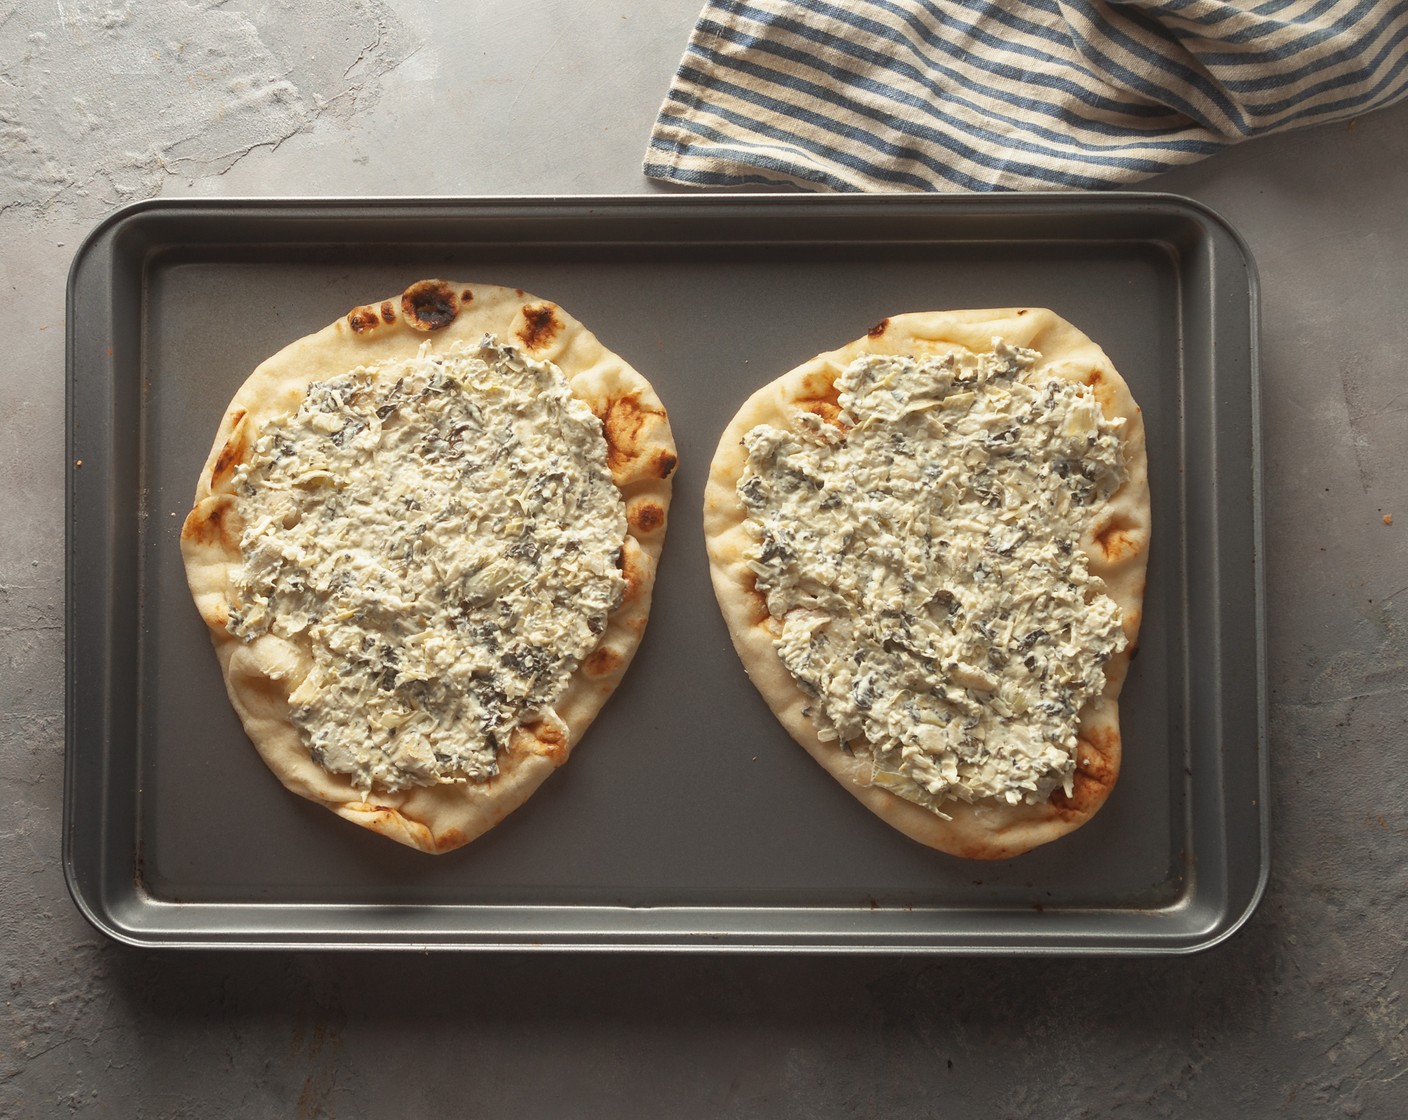 step 3 Spread the Spinach Artichoke Dip (2 cups) liberally on each flatbread, leaving a ½-inch border around the edges.